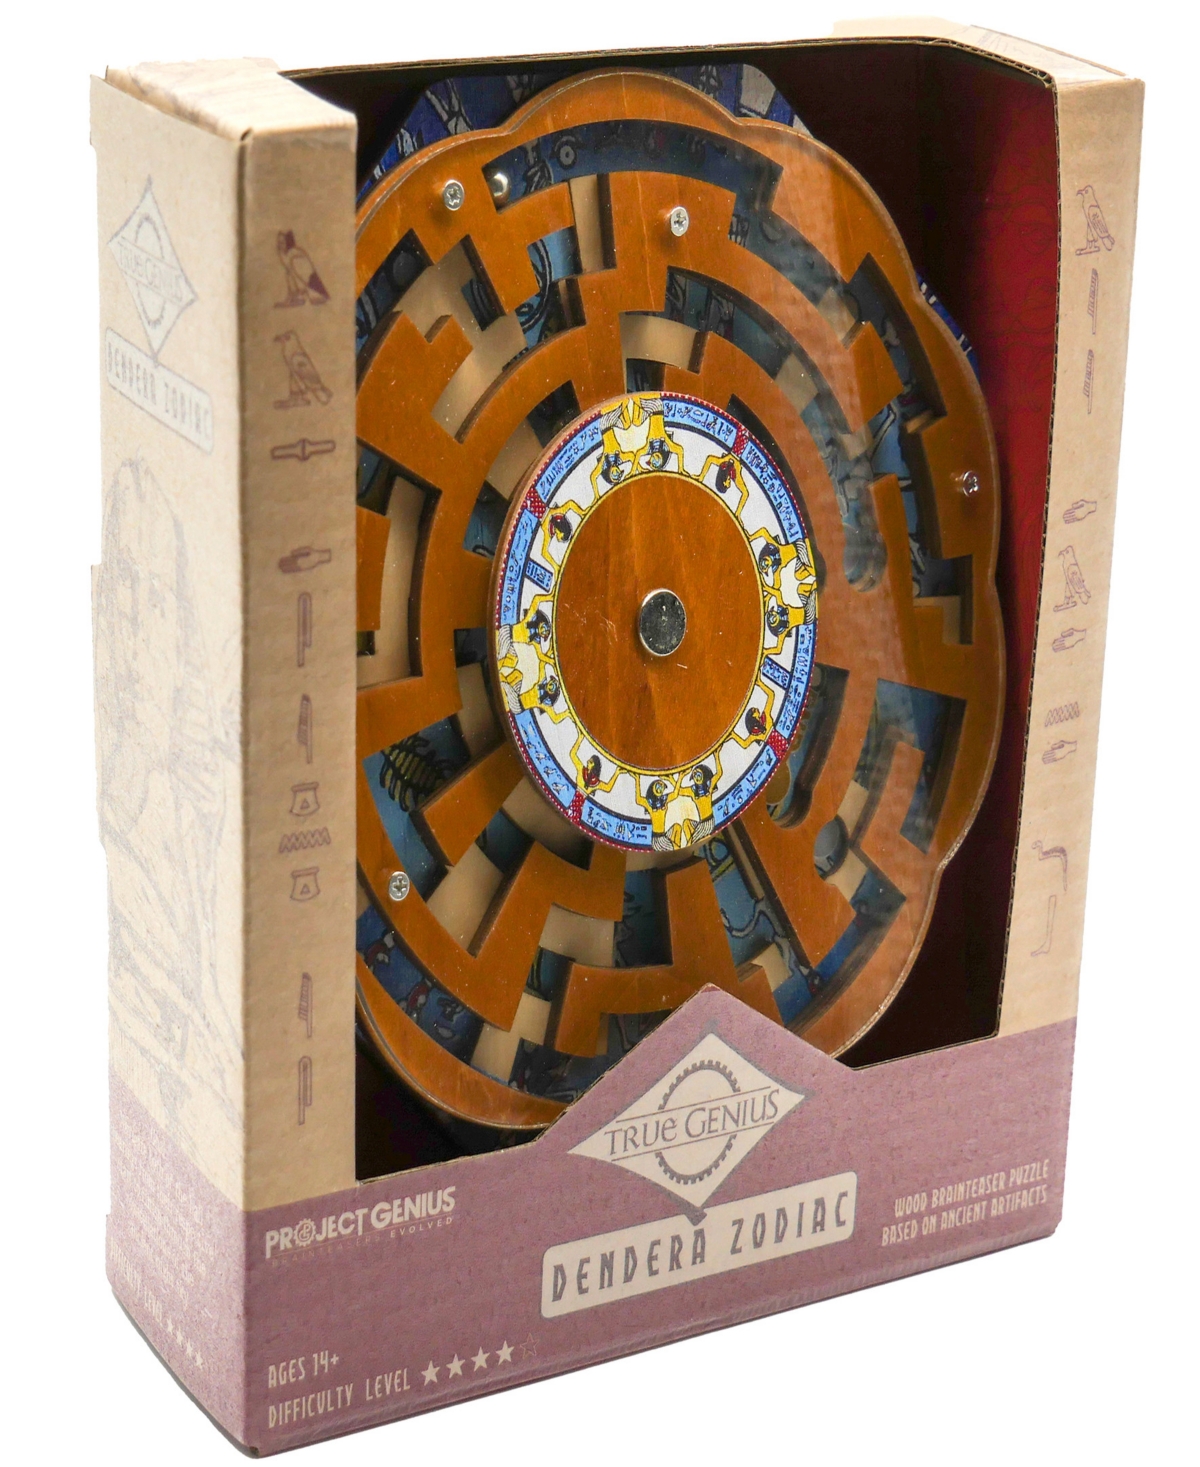 Project Genius Kids' Dendera Zodiac Wooden Puzzle Based On The Ancient Night Sky, Medium Difficultly, Twist The Maze To O In Multi